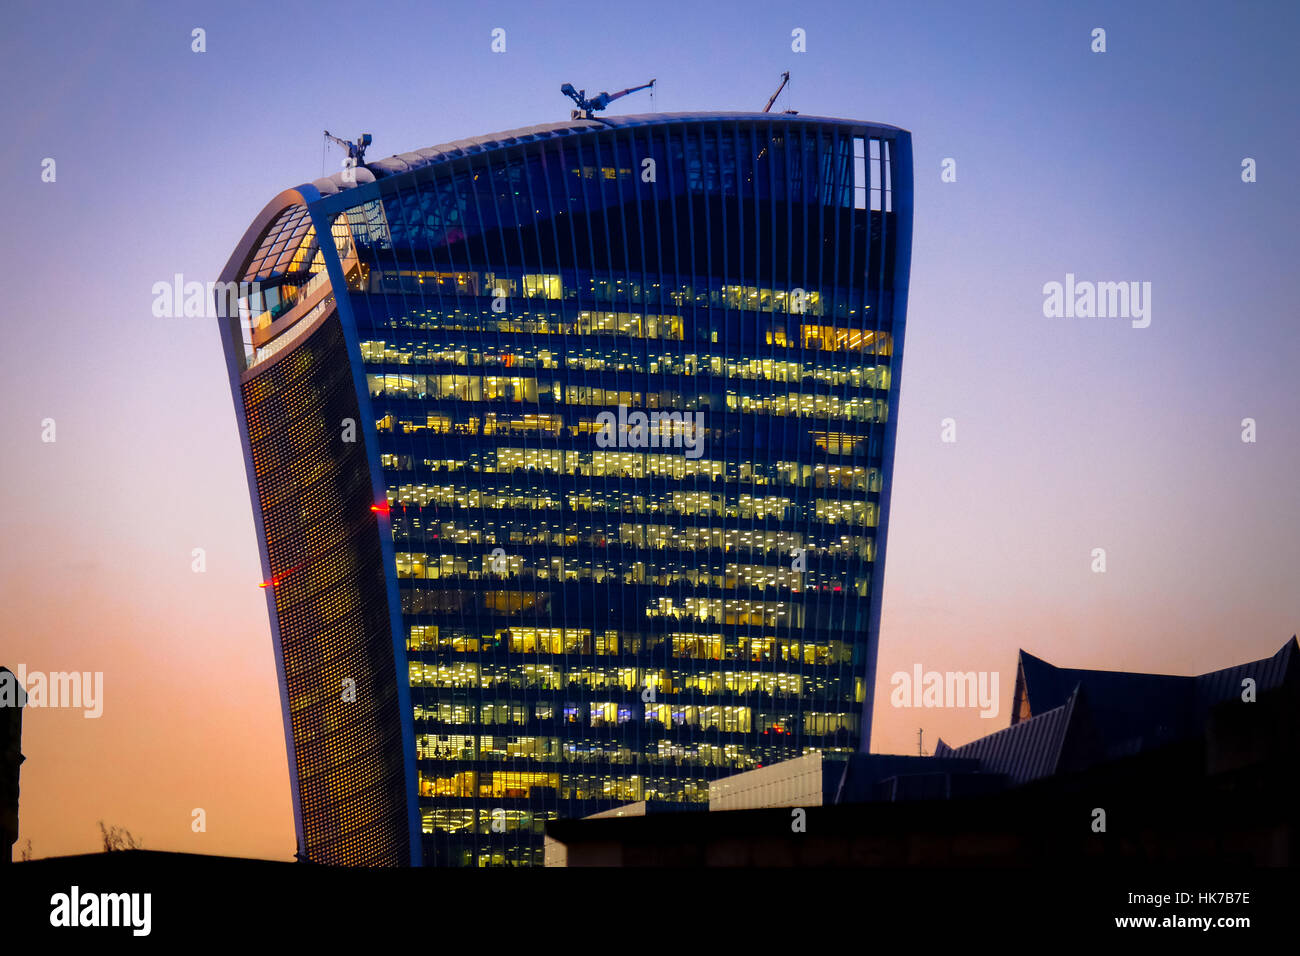 A futuristic looking office building towers above its neighbours in the setting sun Stock Photo